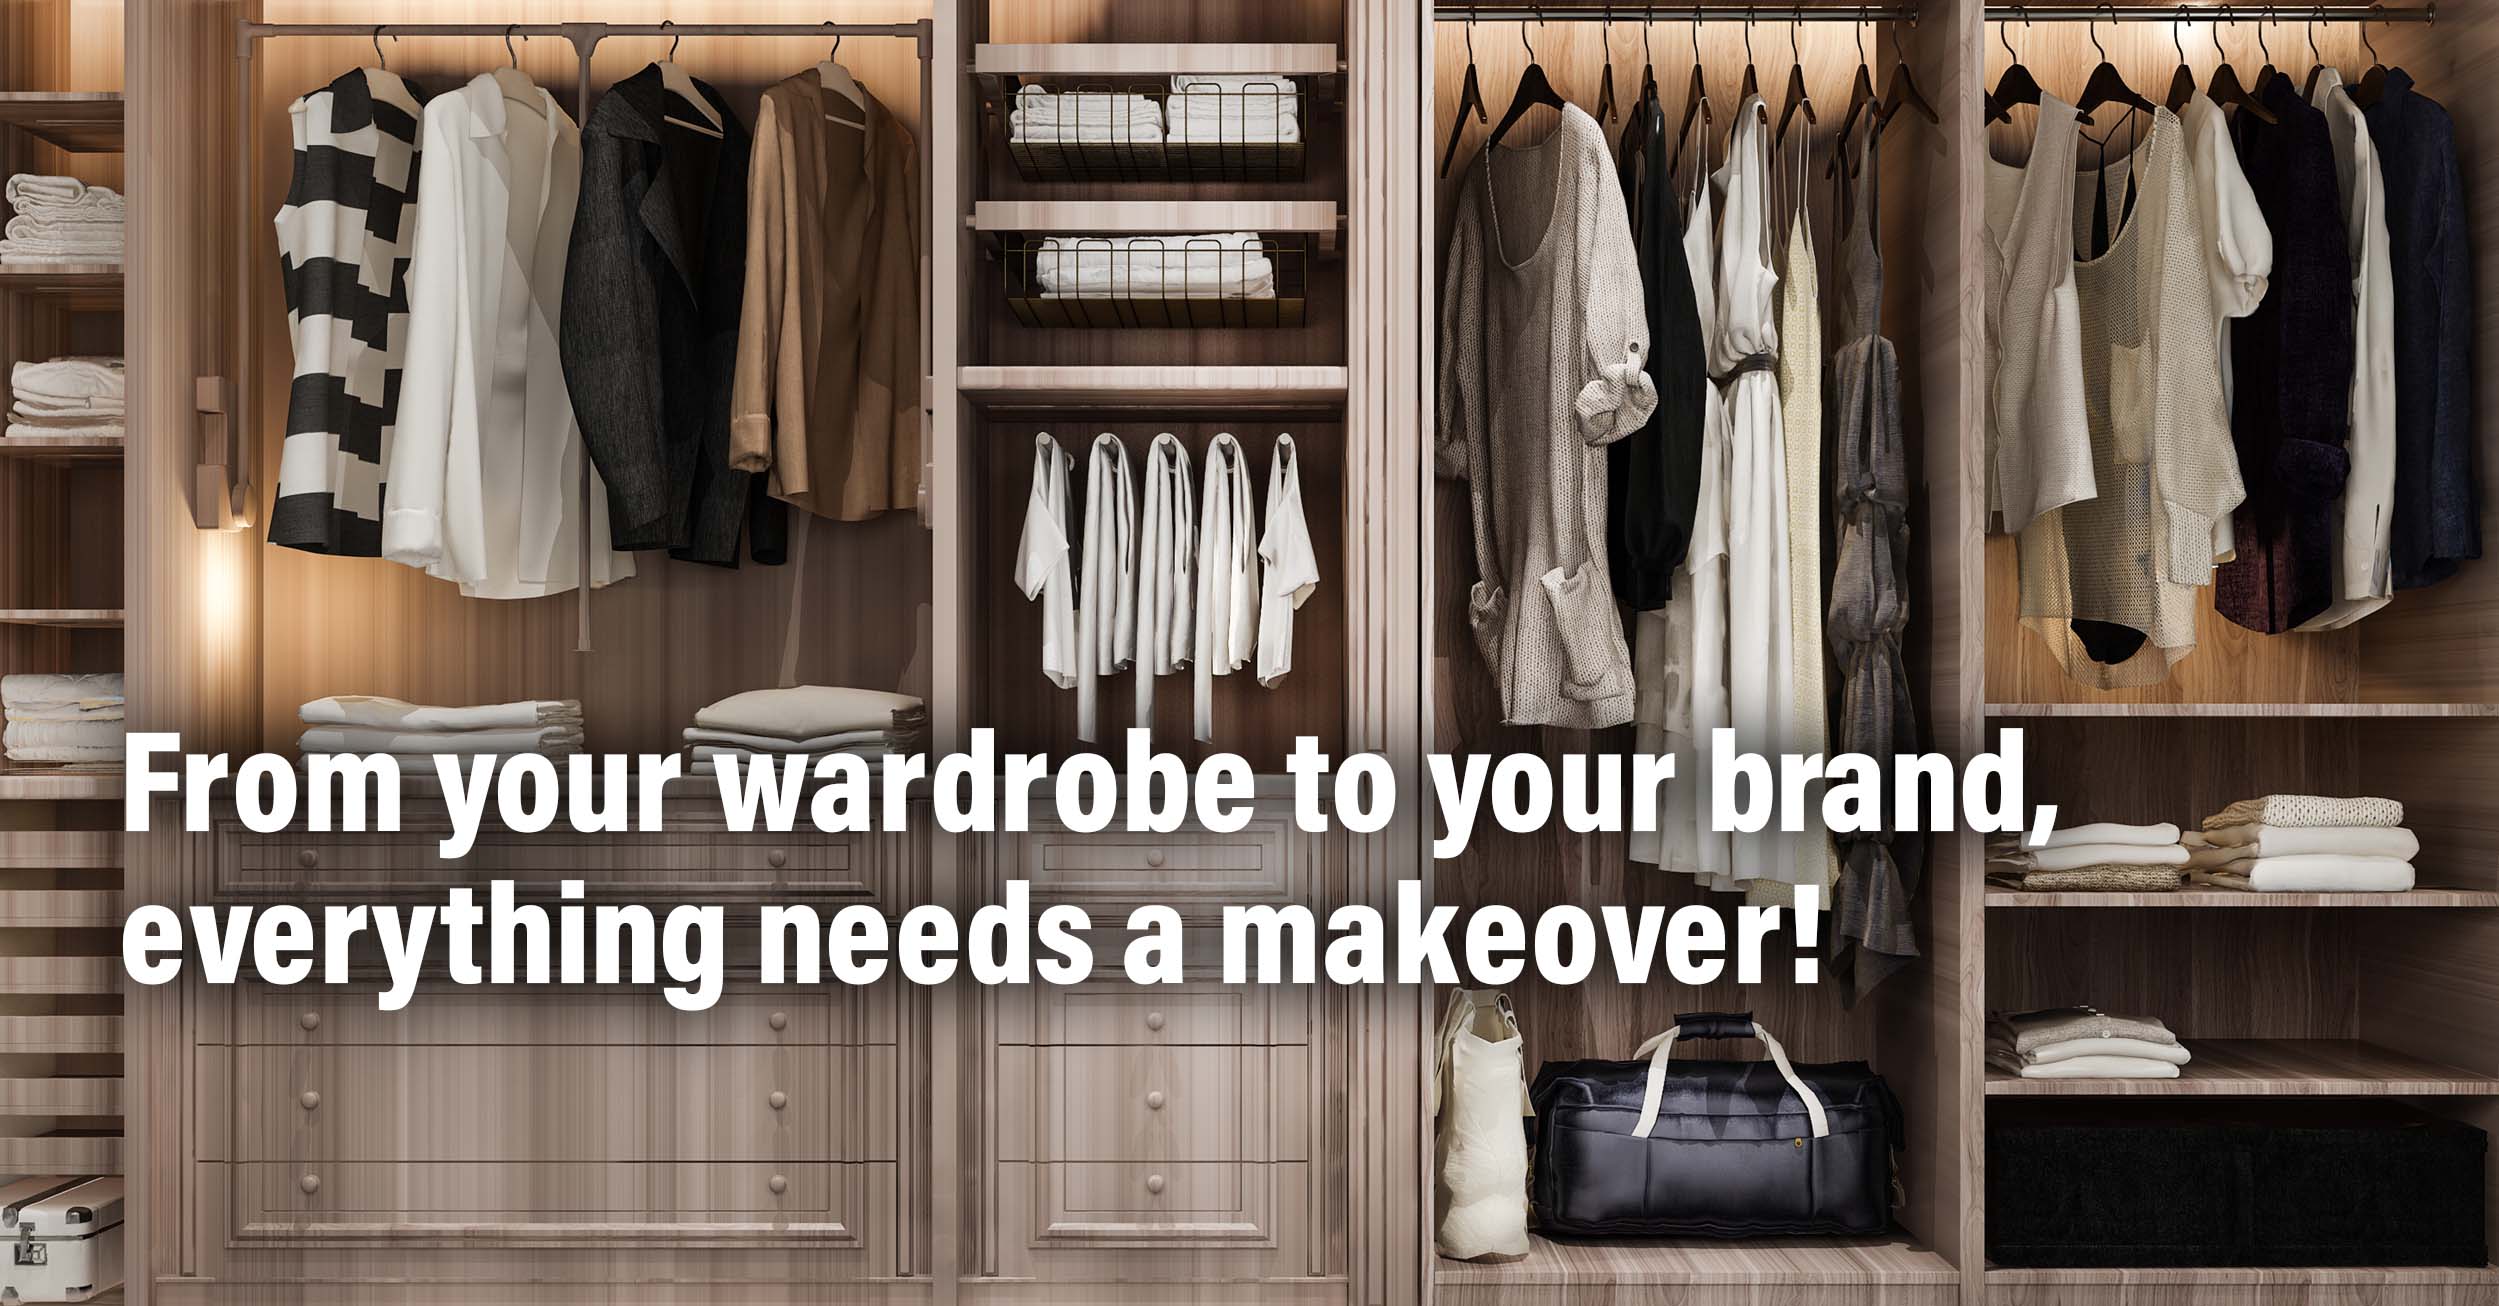 From your wardrobe to your brand, everything needs a makeover!